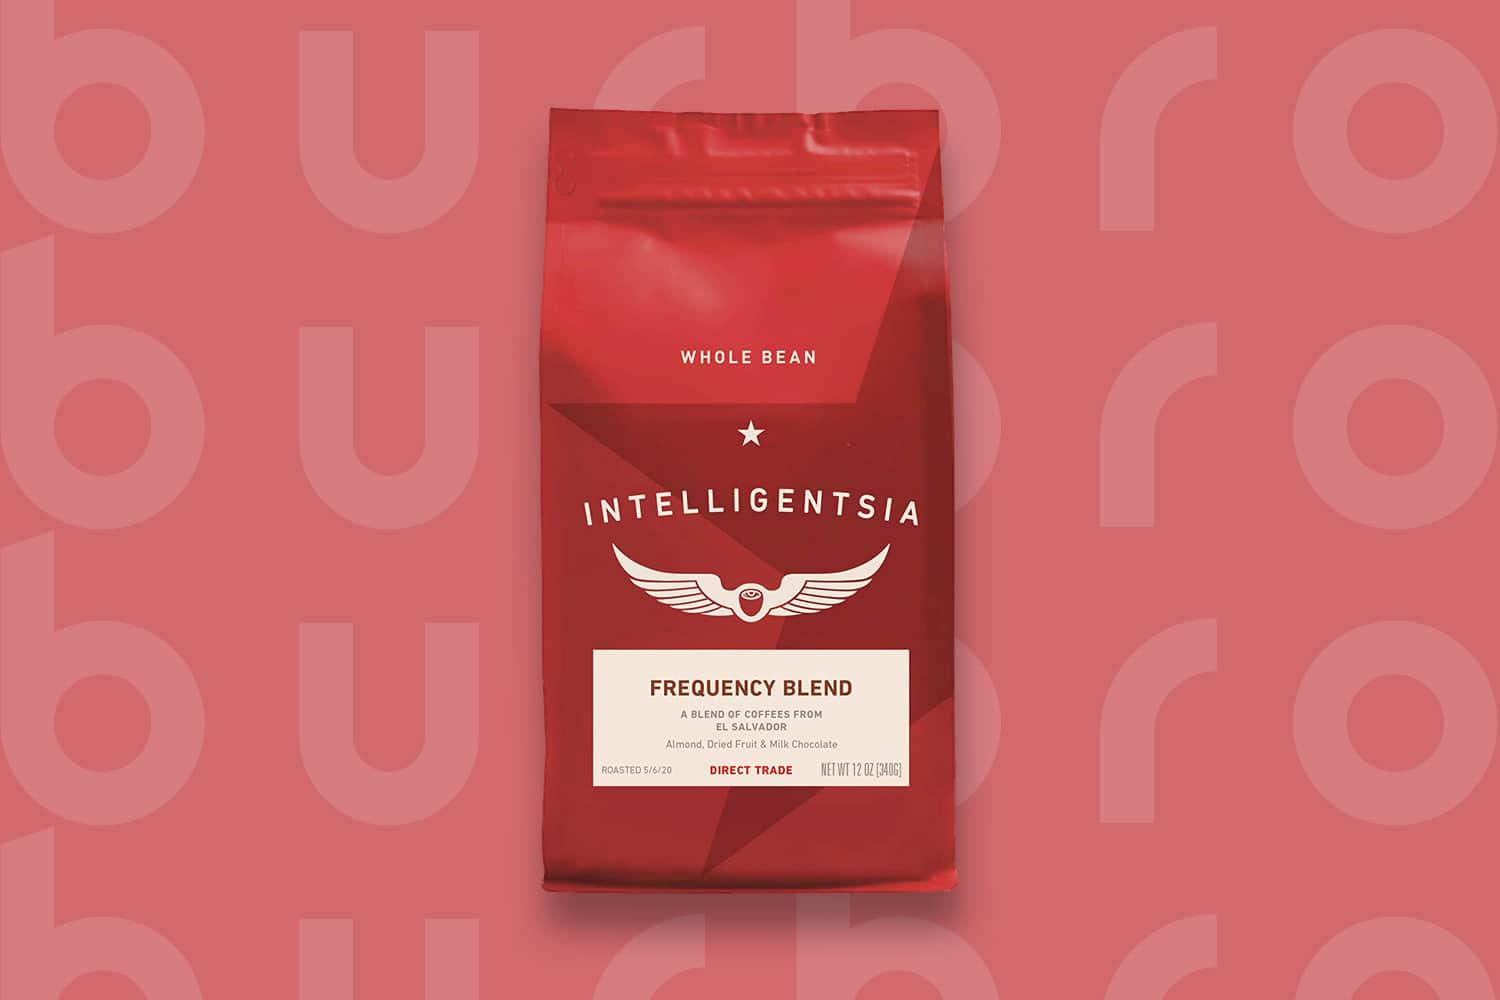 This is the cover photo from our Best Coffee Beans article. It features a red-colored bag of Intelligentsia beans overlaid on a red background with embossed Burbro logo.